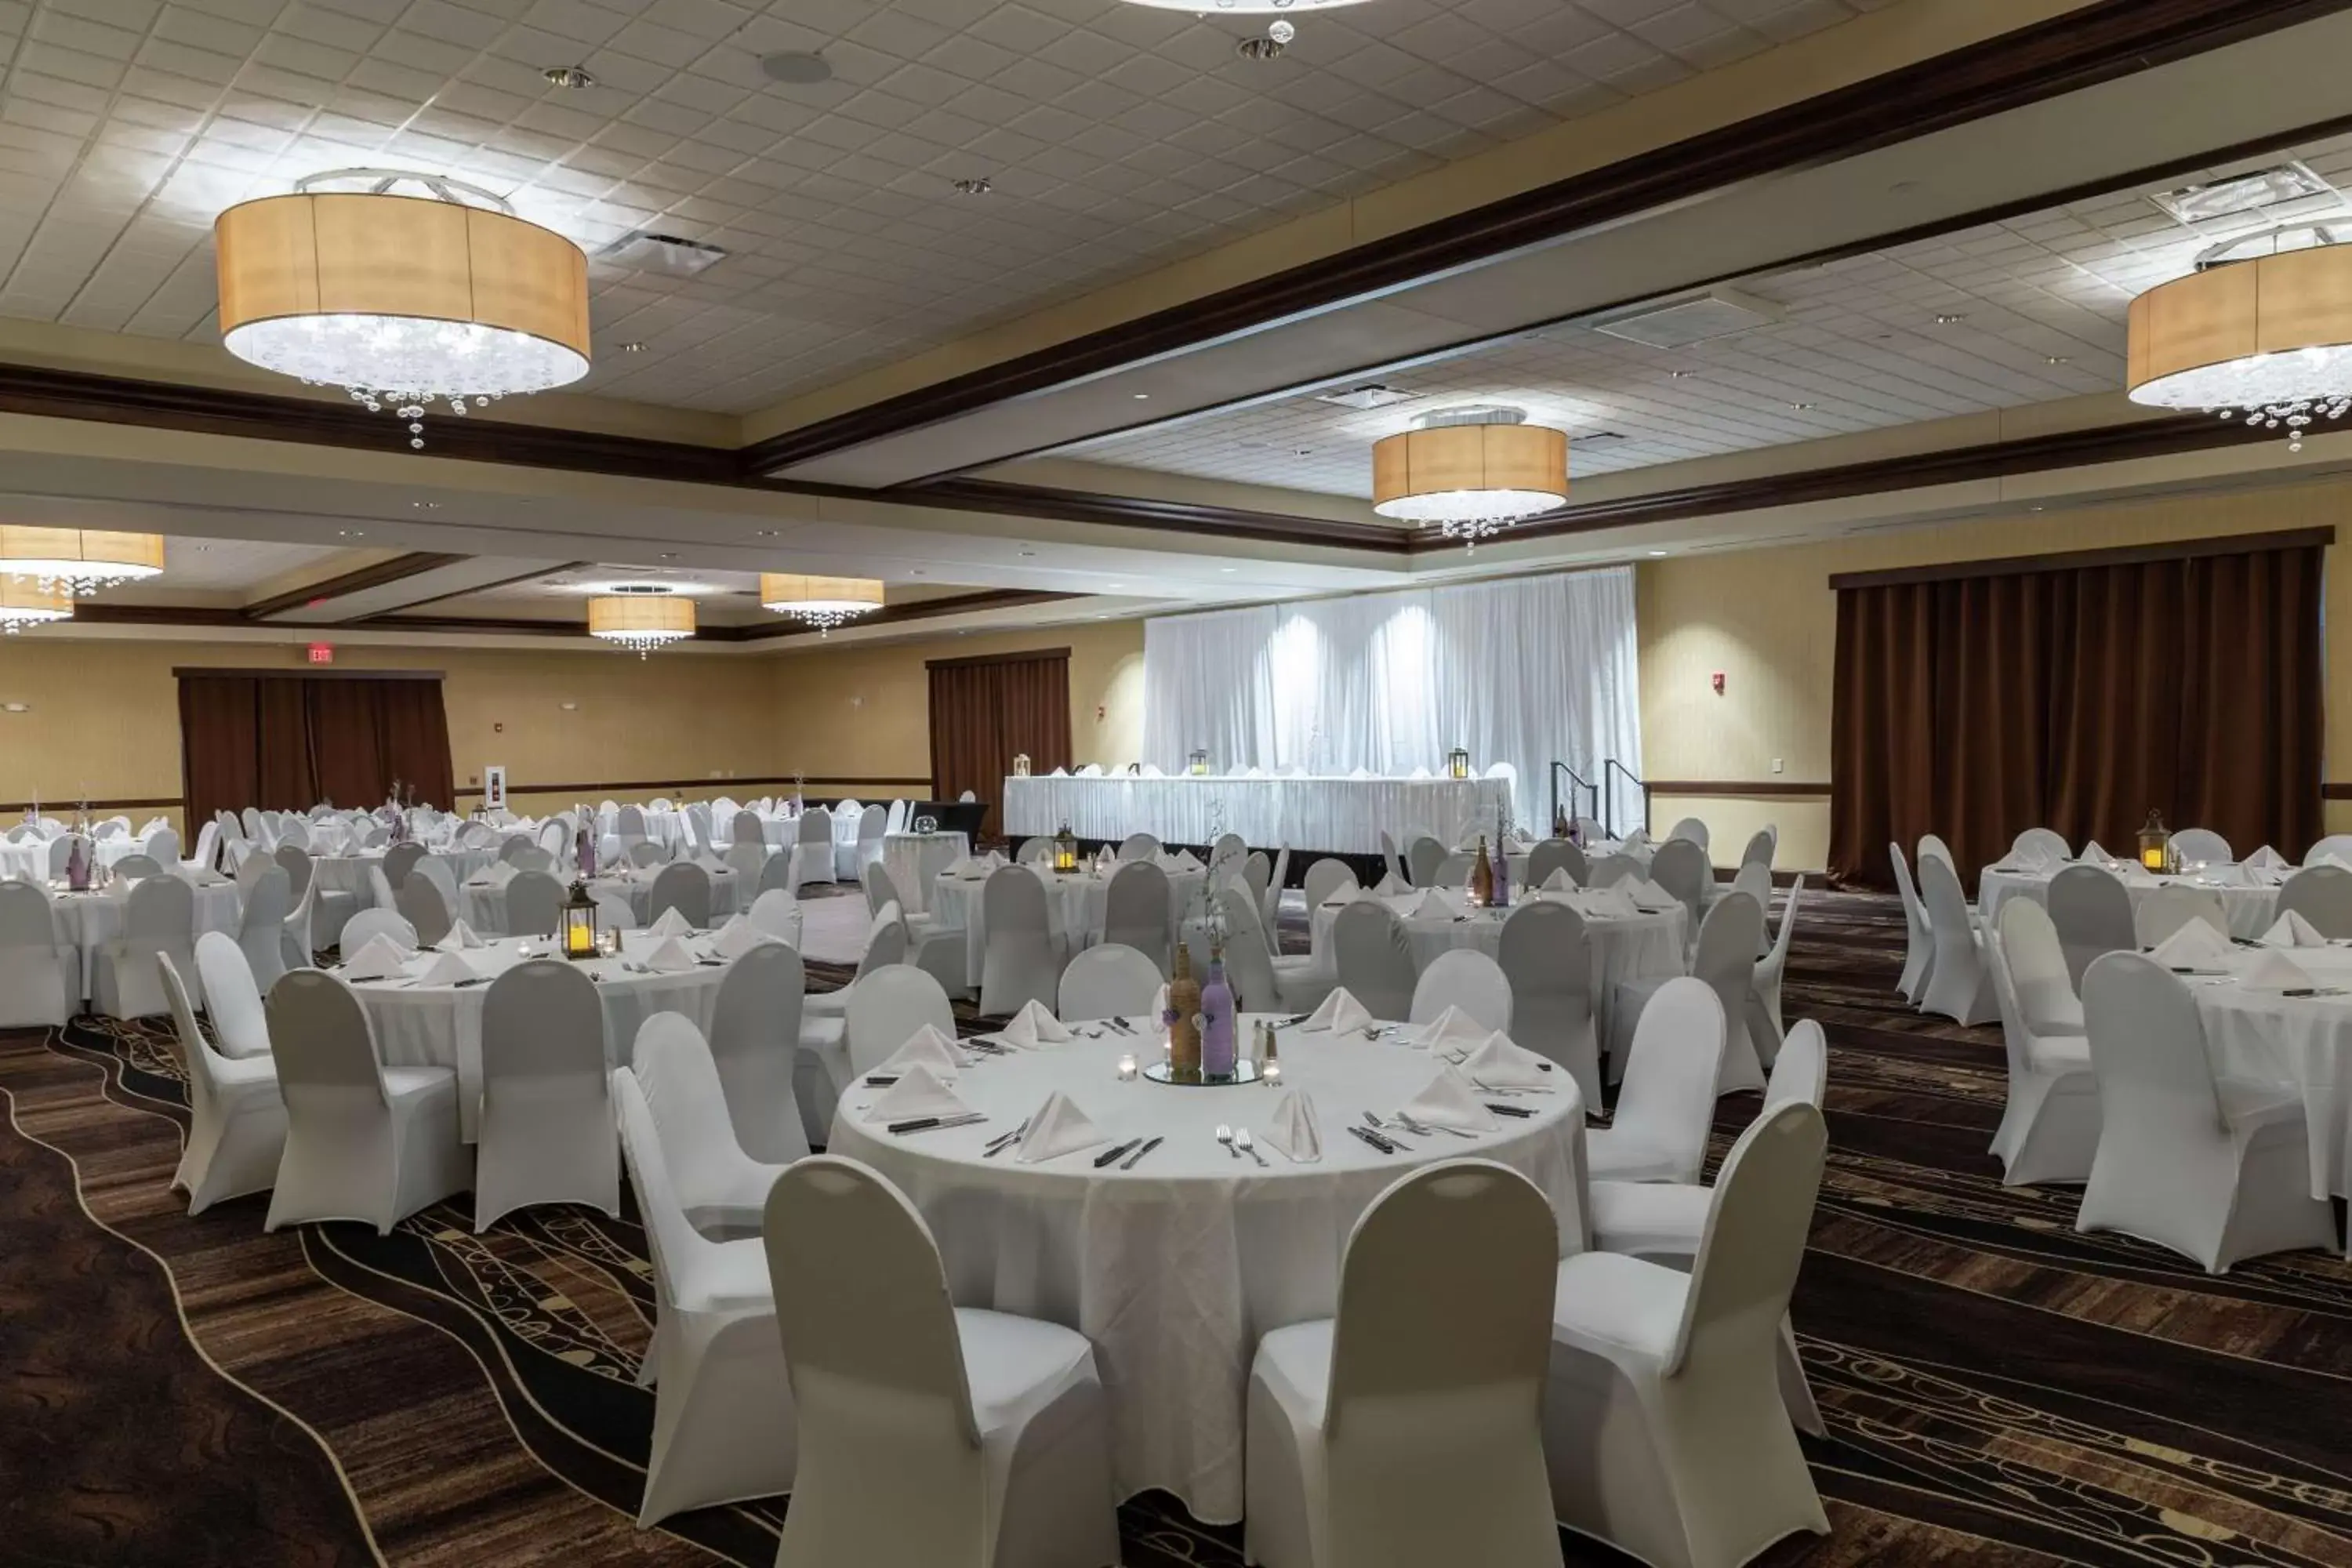 Meeting/conference room, Banquet Facilities in Hilton Garden Inn West Des Moines